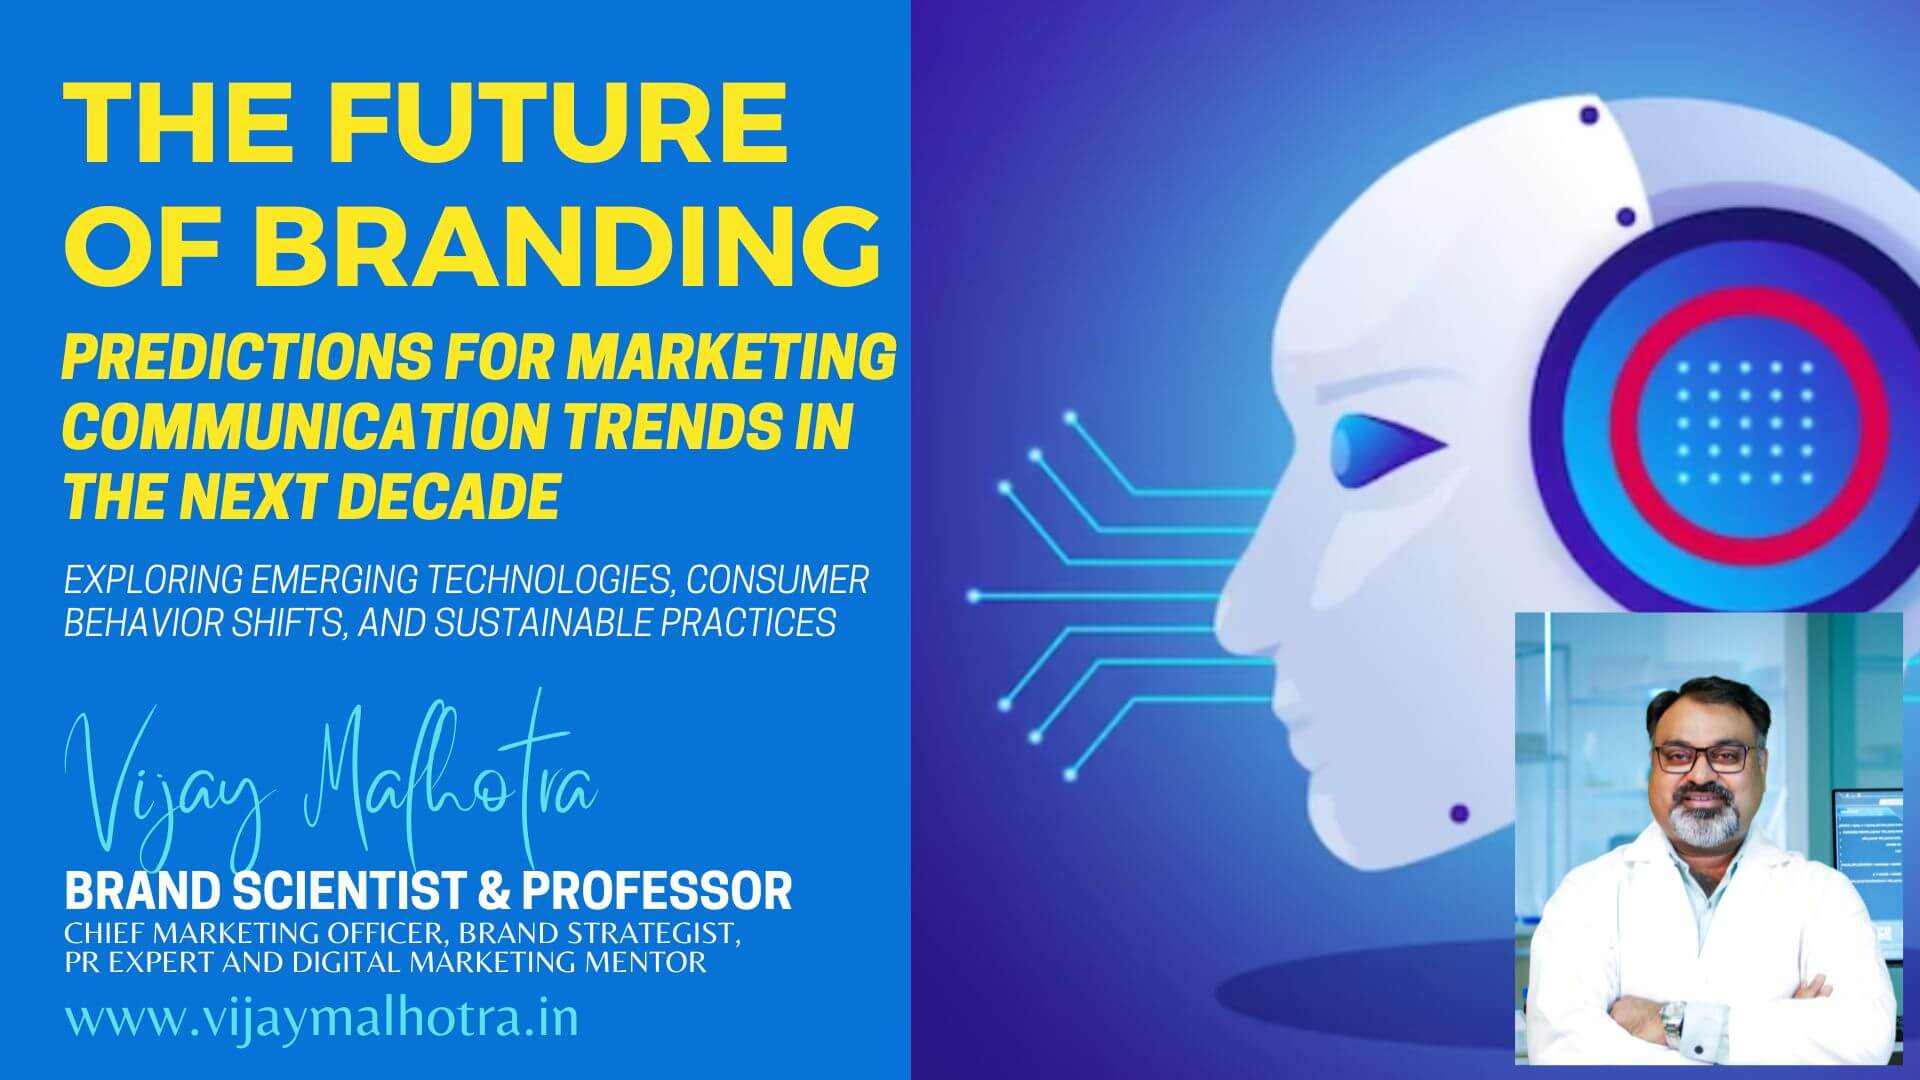 Vijay Malhotra's insights on future branding and marketing communication trends, predicting the trajectory for the next decade's industry developments